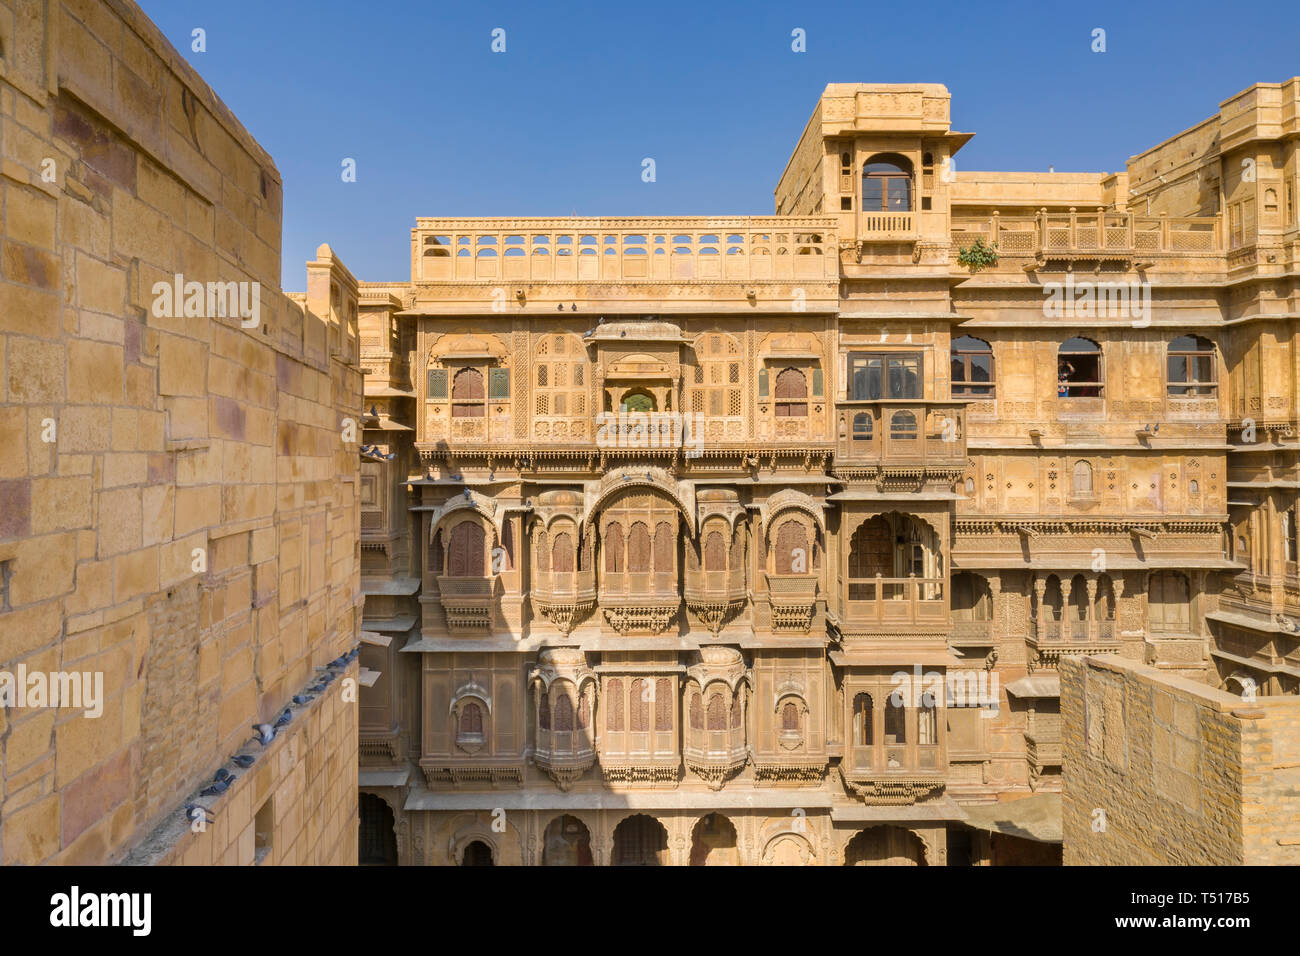 India, Rajasthan, Jaisalmer, Old Town, Typical Havel (Old historic House) Stock Photo